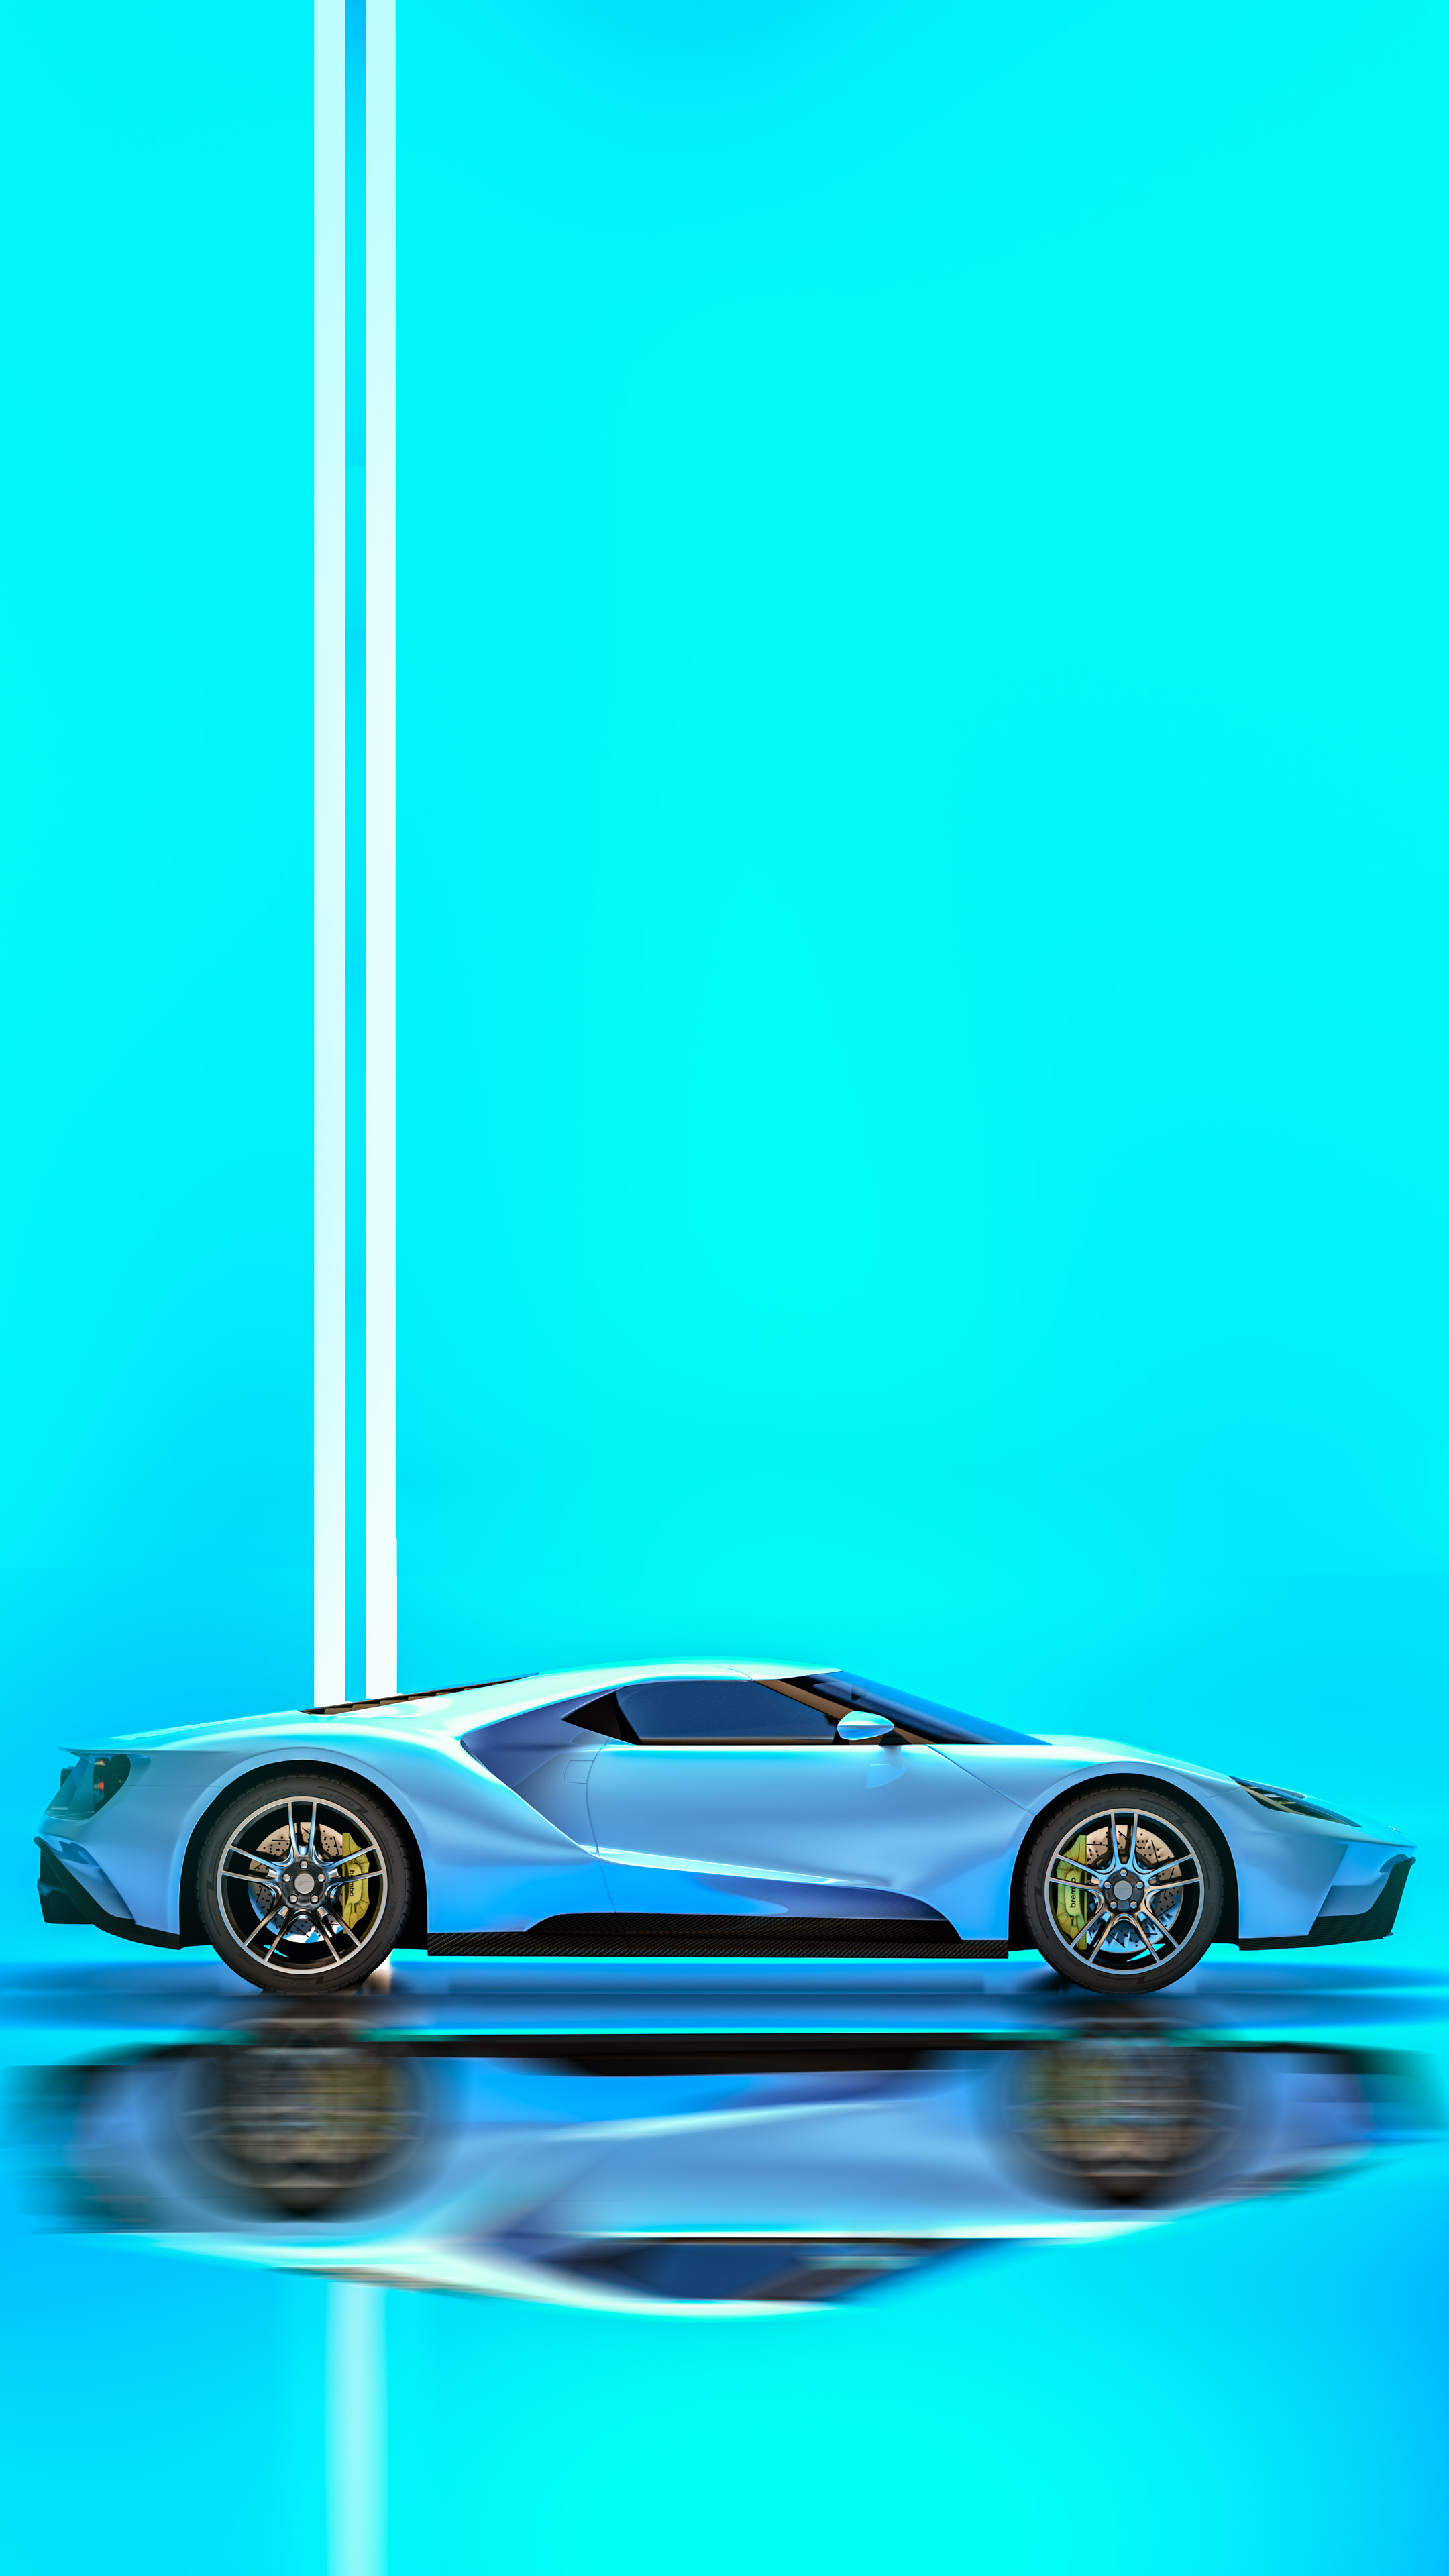 Immerse yourself in the visual splendor of automotive excellence with the 4K car wallpaper for mobile, showcasing the dynamic Ford GT, ready to enhance your mobile screen.